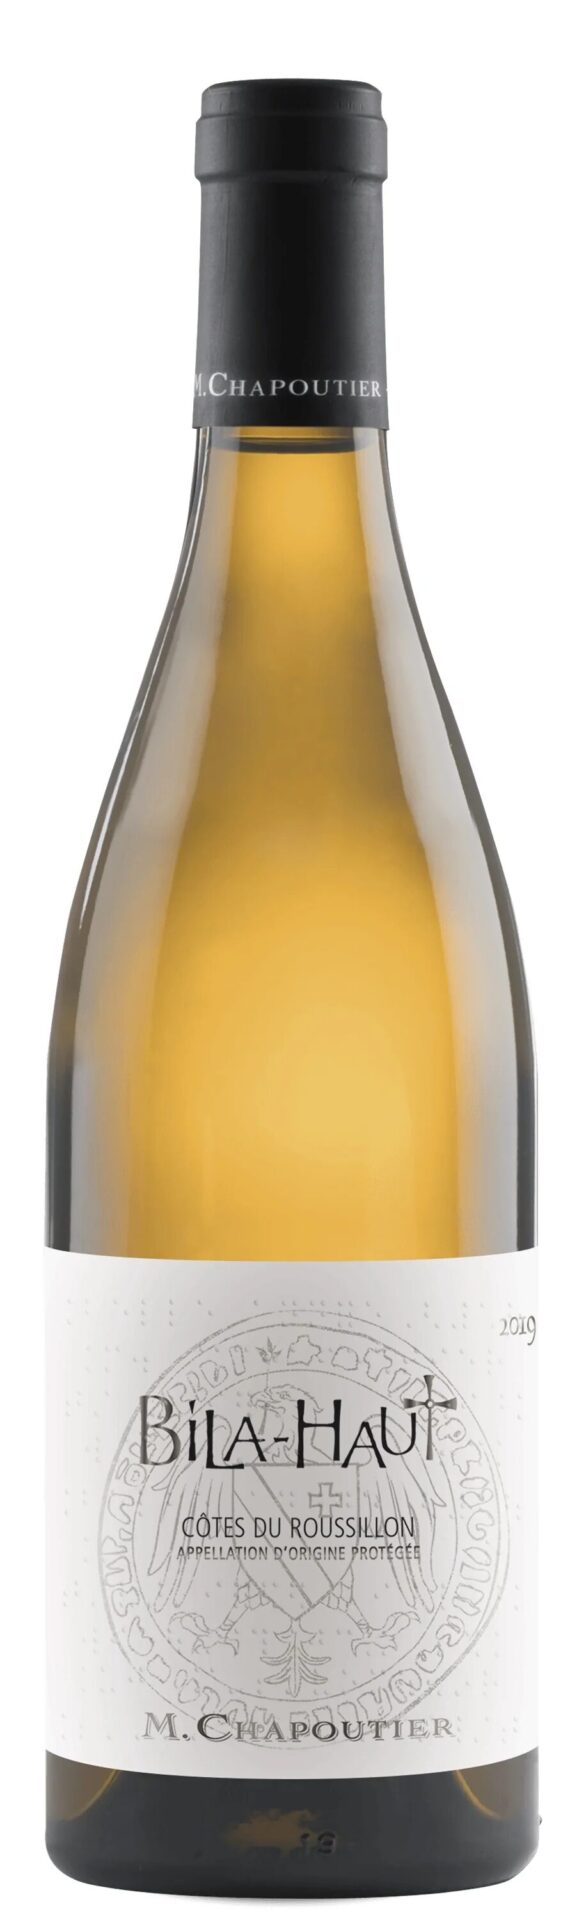 BilaHaut Blanc one of our 7 wines for spring